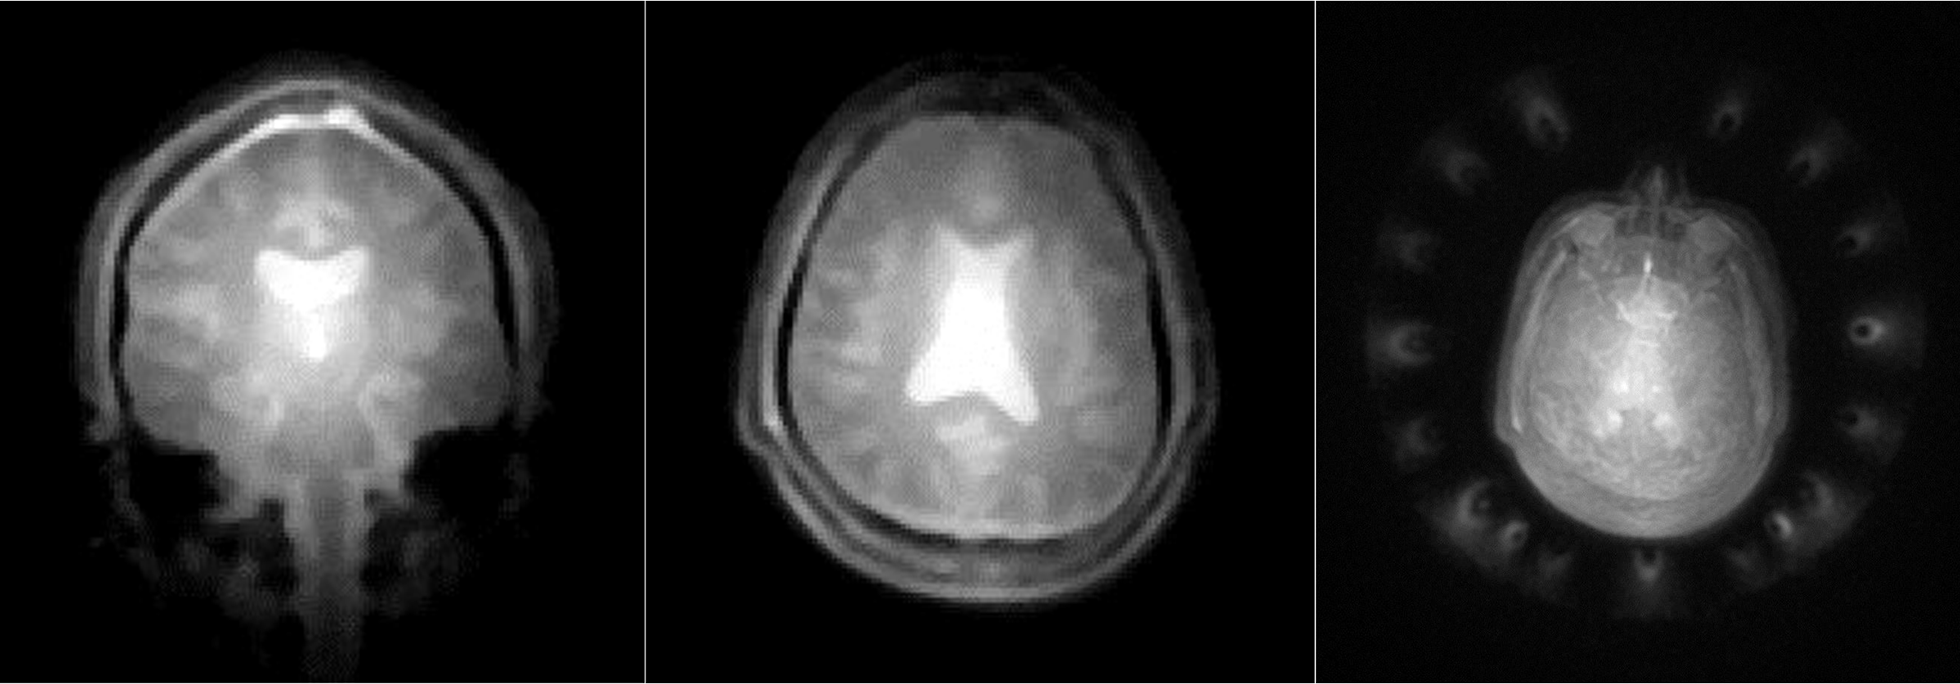 Multiple images from a MRI machine using new technology.